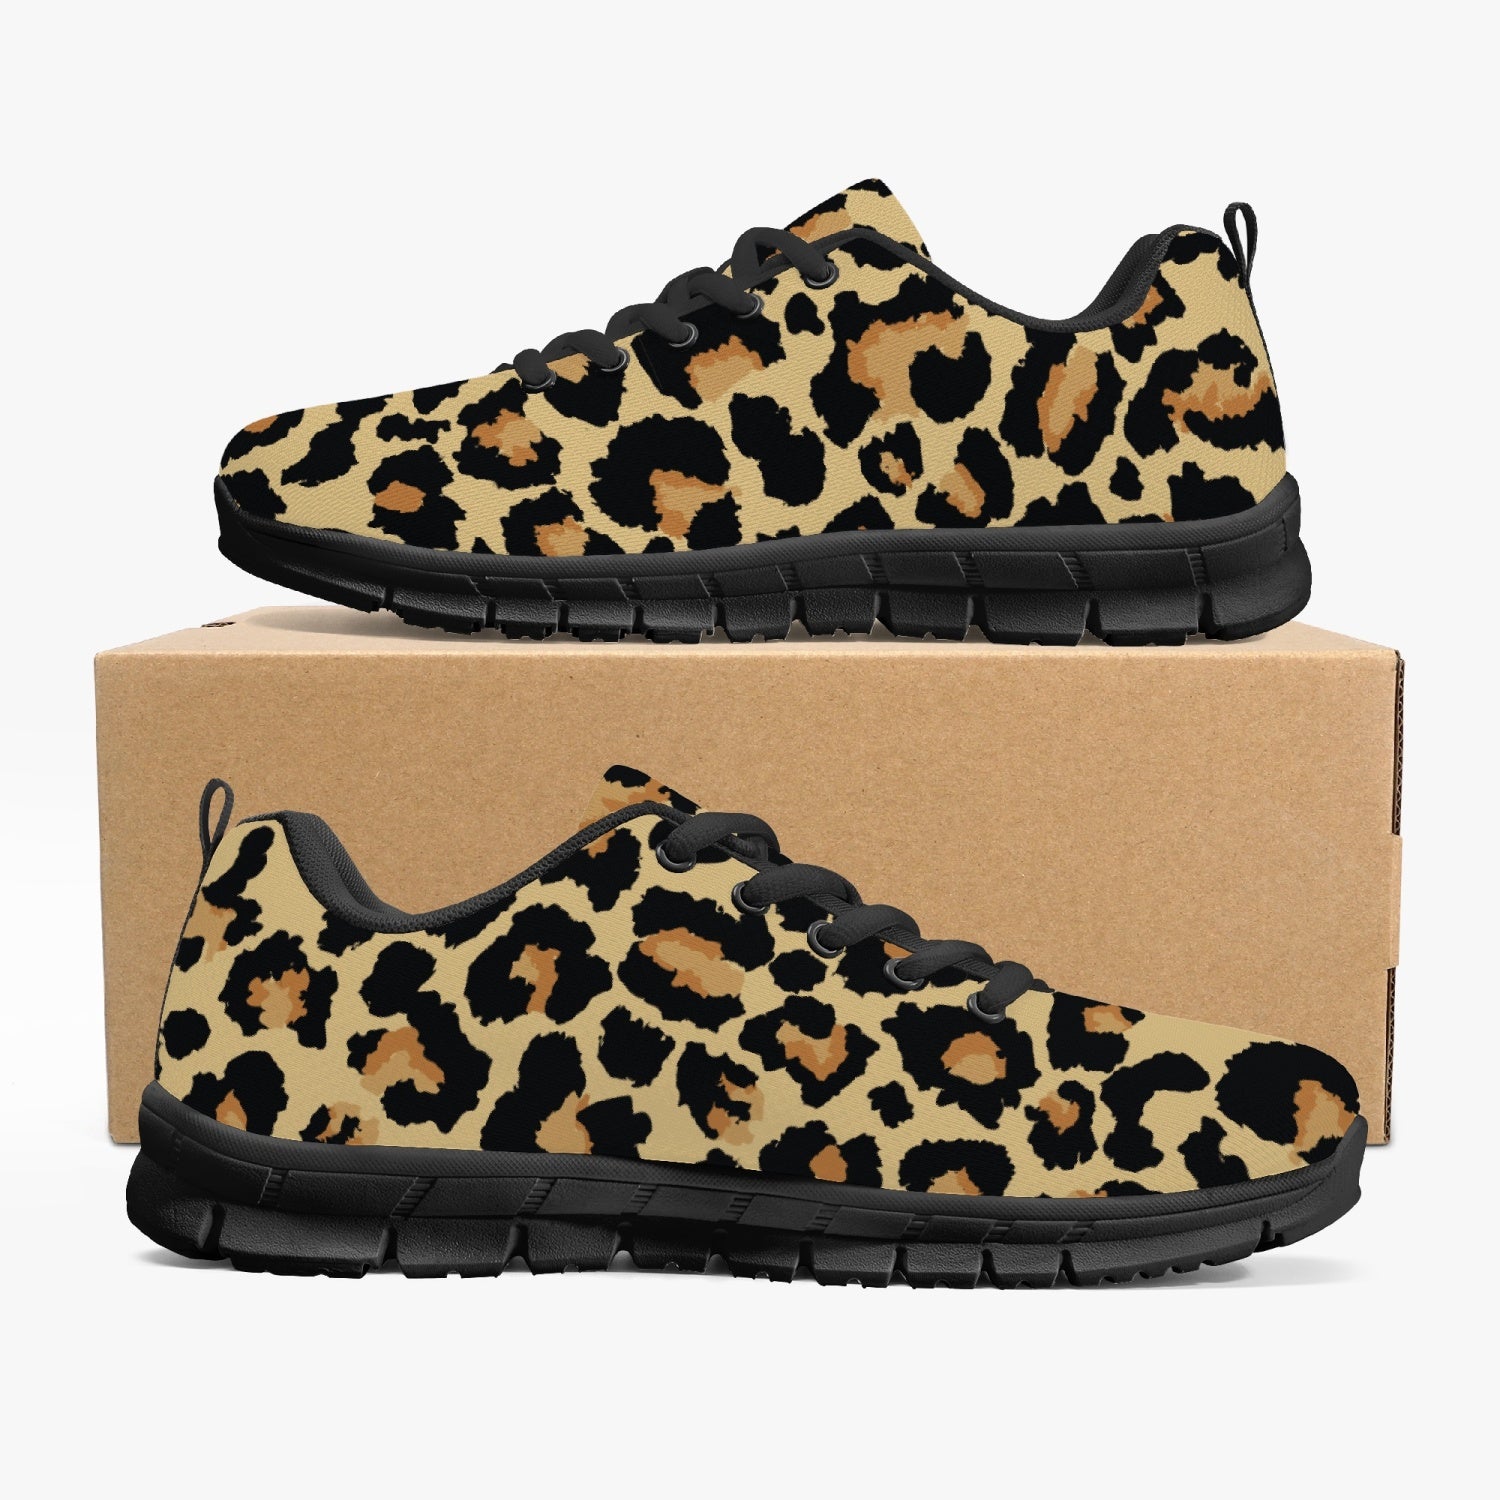 Women's Wild Animal Leopard Cheetah Half Print Workout Gym Sneakers Inside Out View